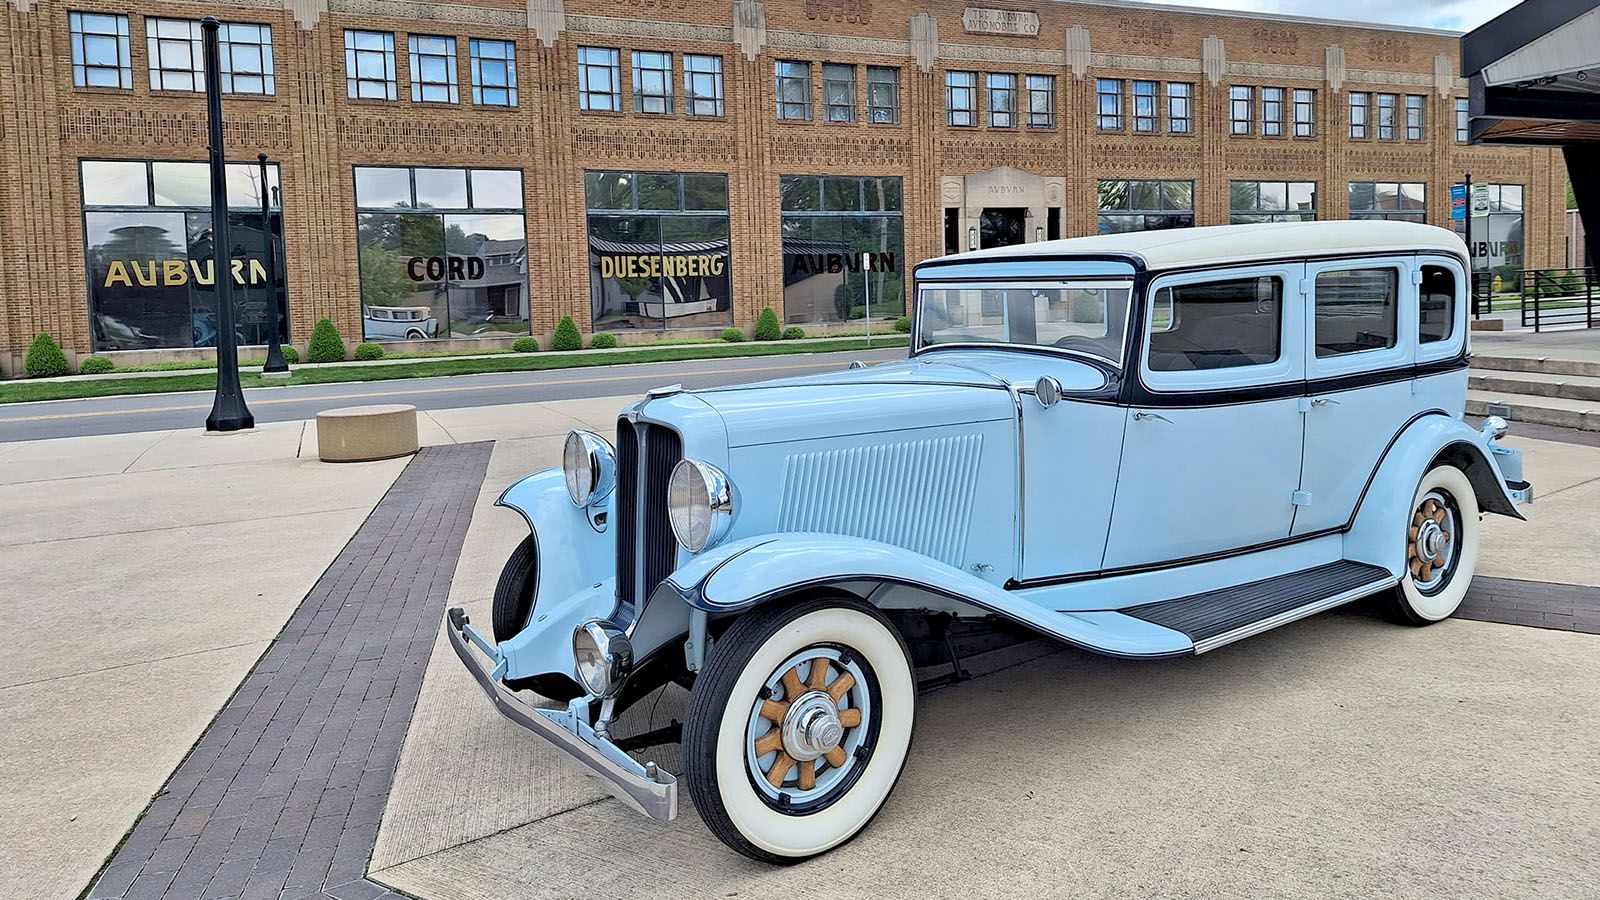 A 1931 Auburn is shown outside Auburn Cord Duesenberg Automobile Museum, which will celebrate its 50th anniversary on Saturday, July 6.